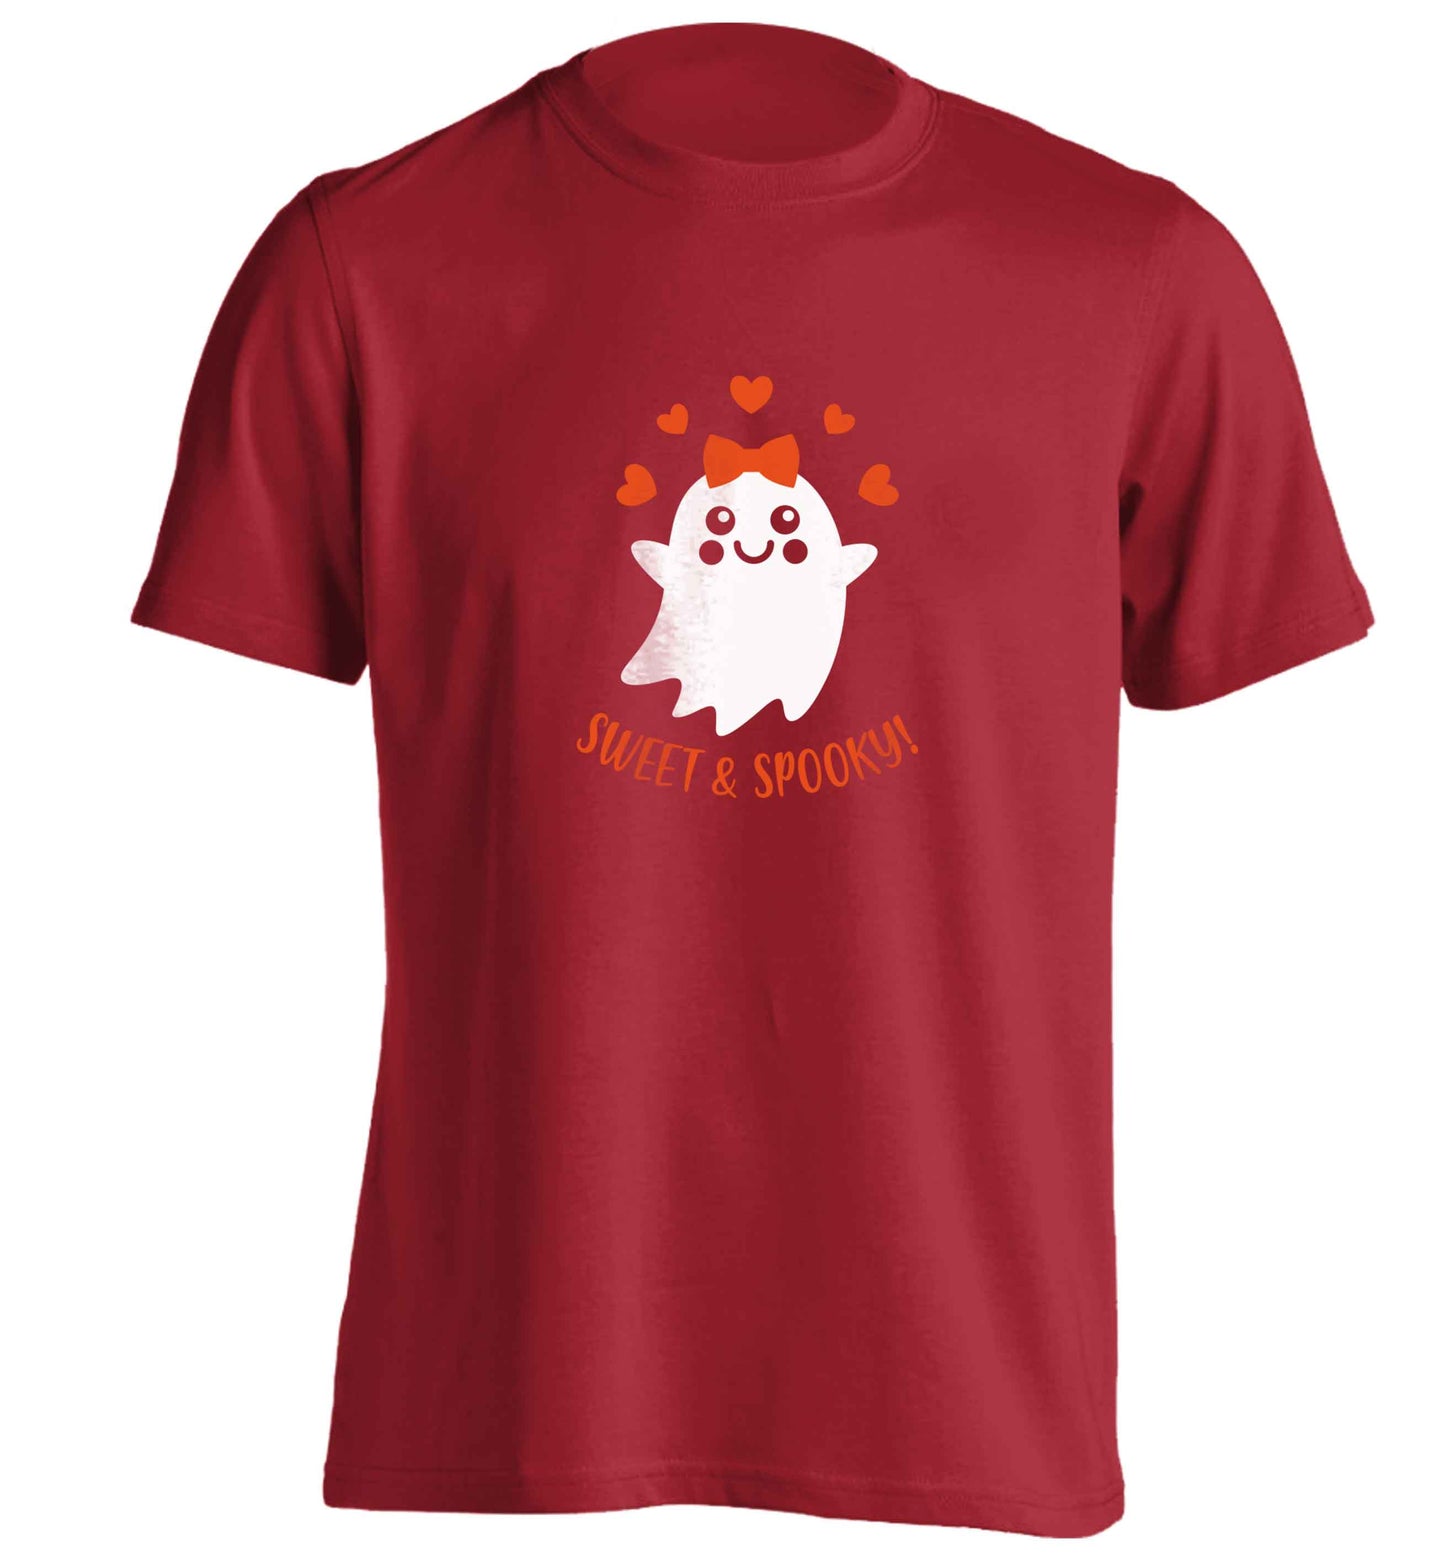 Sweet and spooky adults unisex red Tshirt 2XL